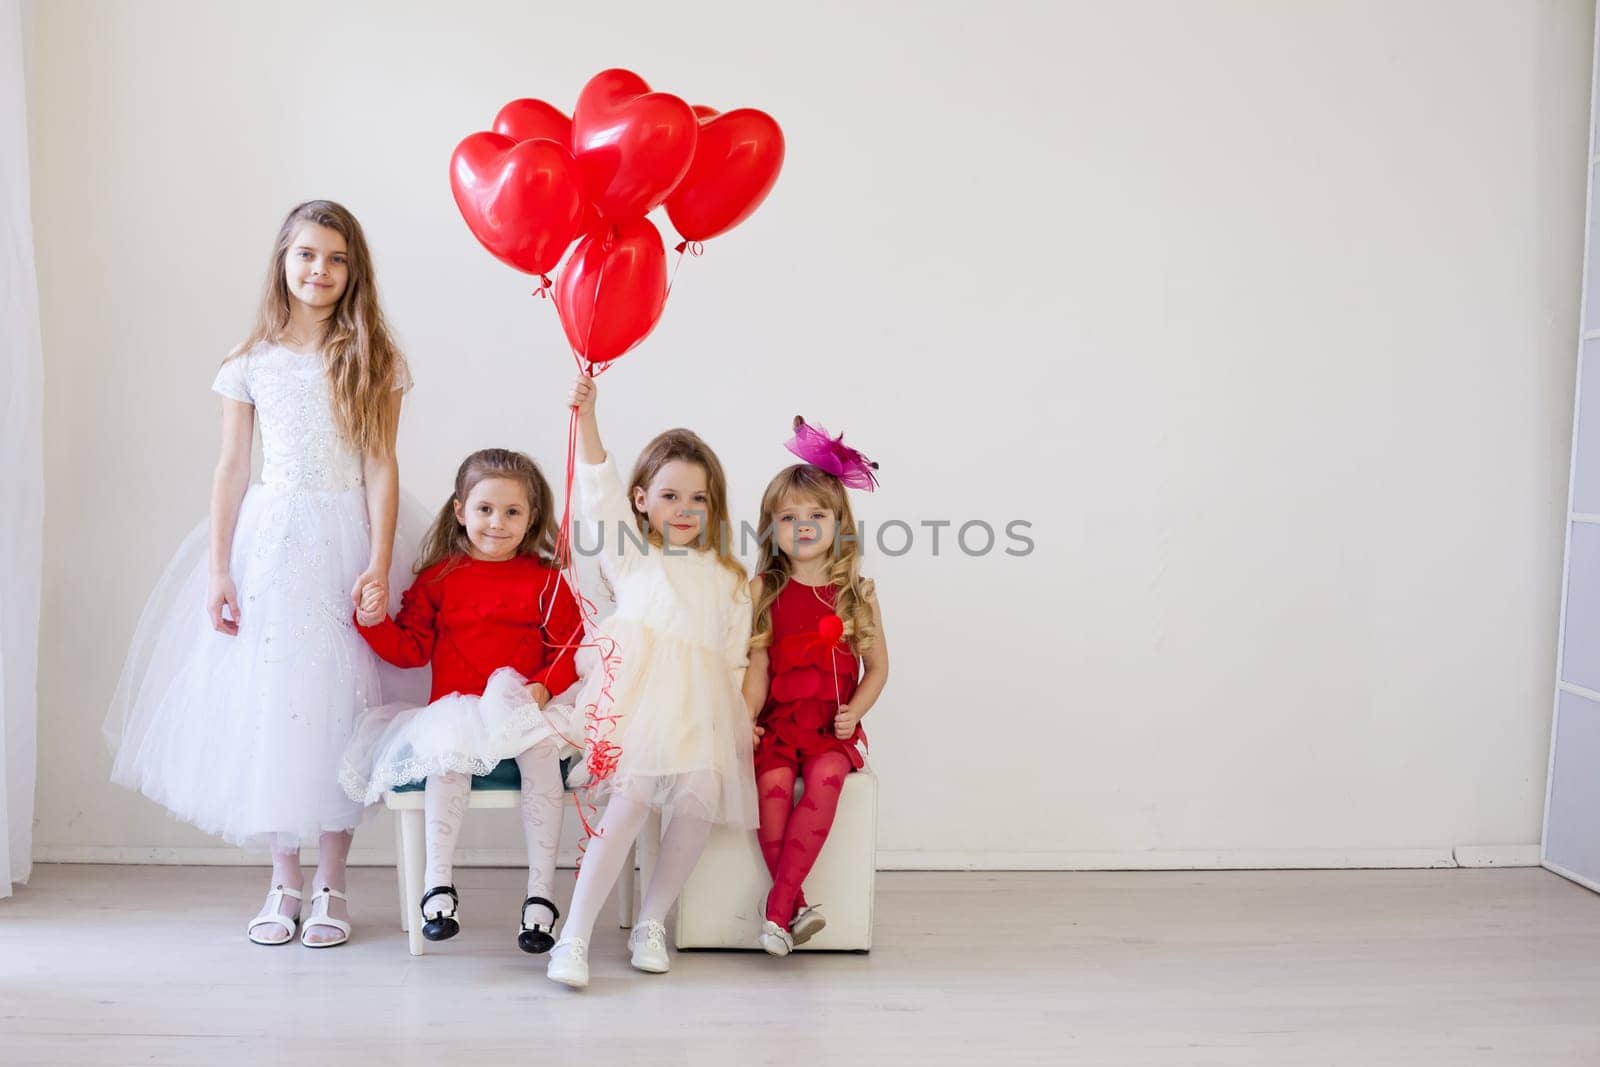 a beautiful children with red balls sitting on chairs